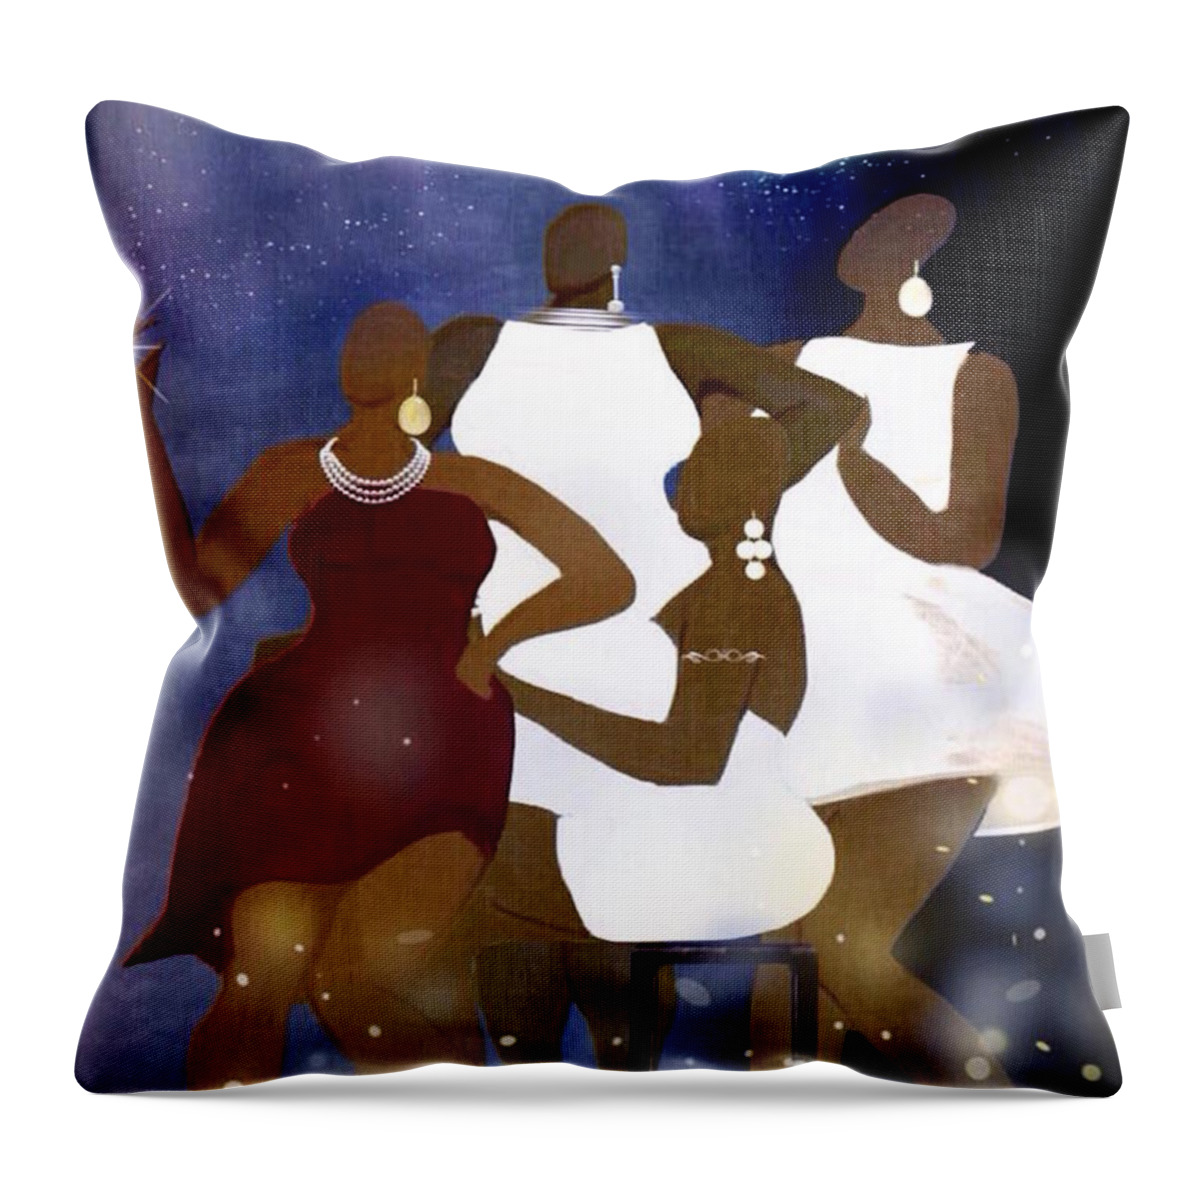 Wedding Party Throw Pillow featuring the digital art Engagement Party by Romaine Head